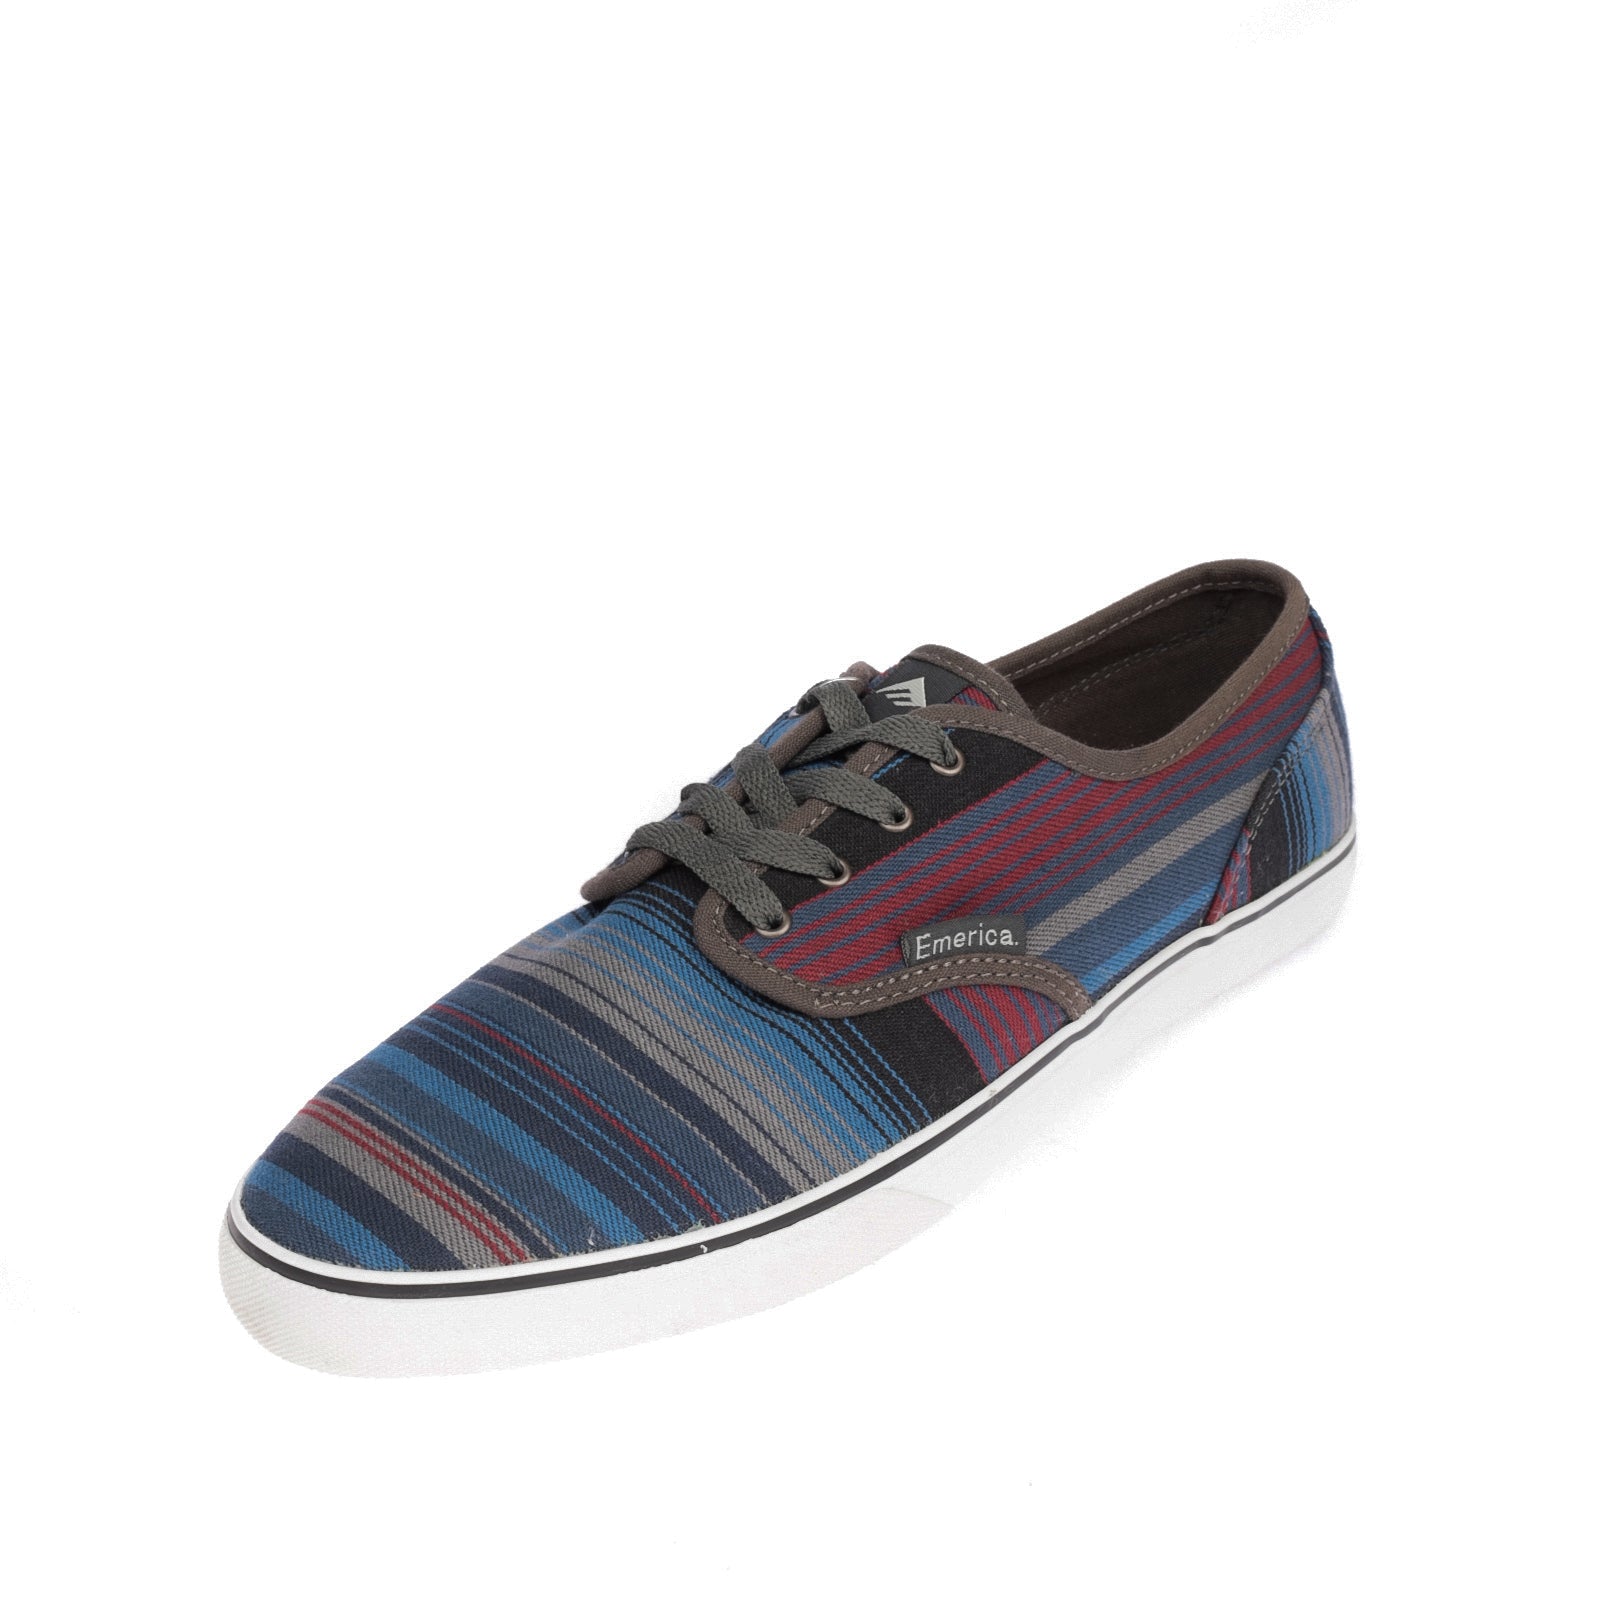 EMERICA Sneakers EU 44 UK 9.5 US 10.5 Striped Logo Patch Lace Up Round Toe gallery main photo